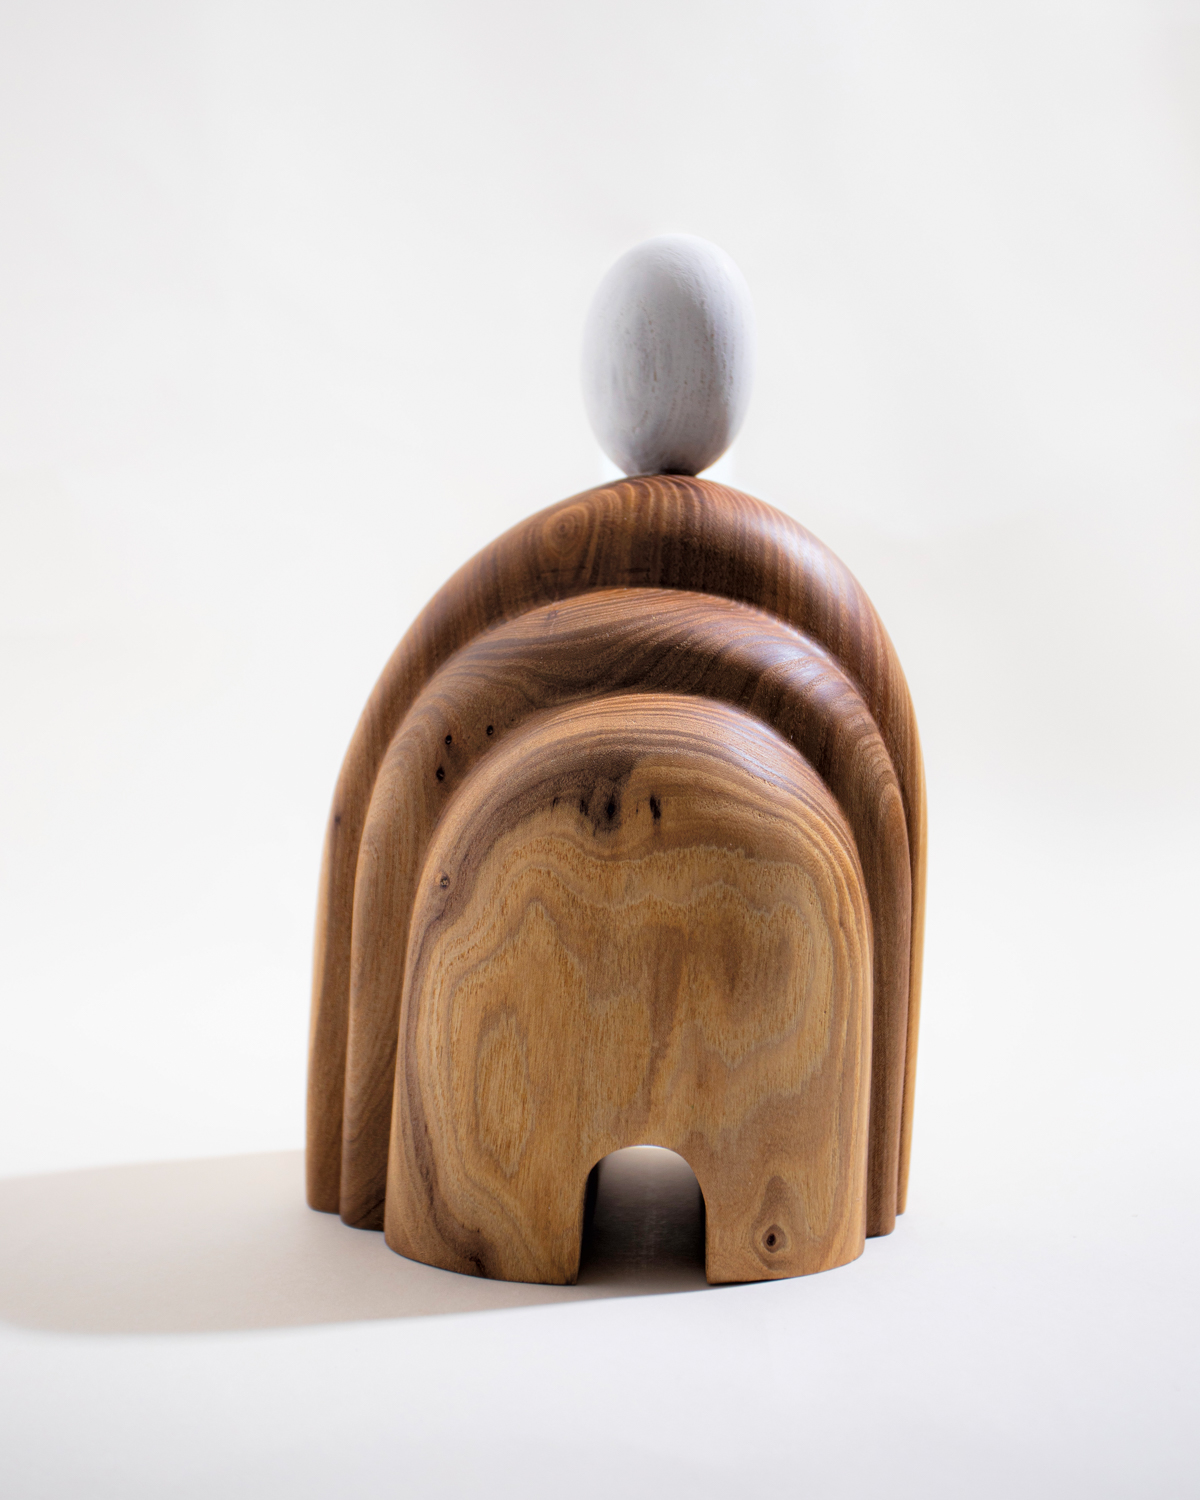 abstract wood sculpture by Jessica Milavitz